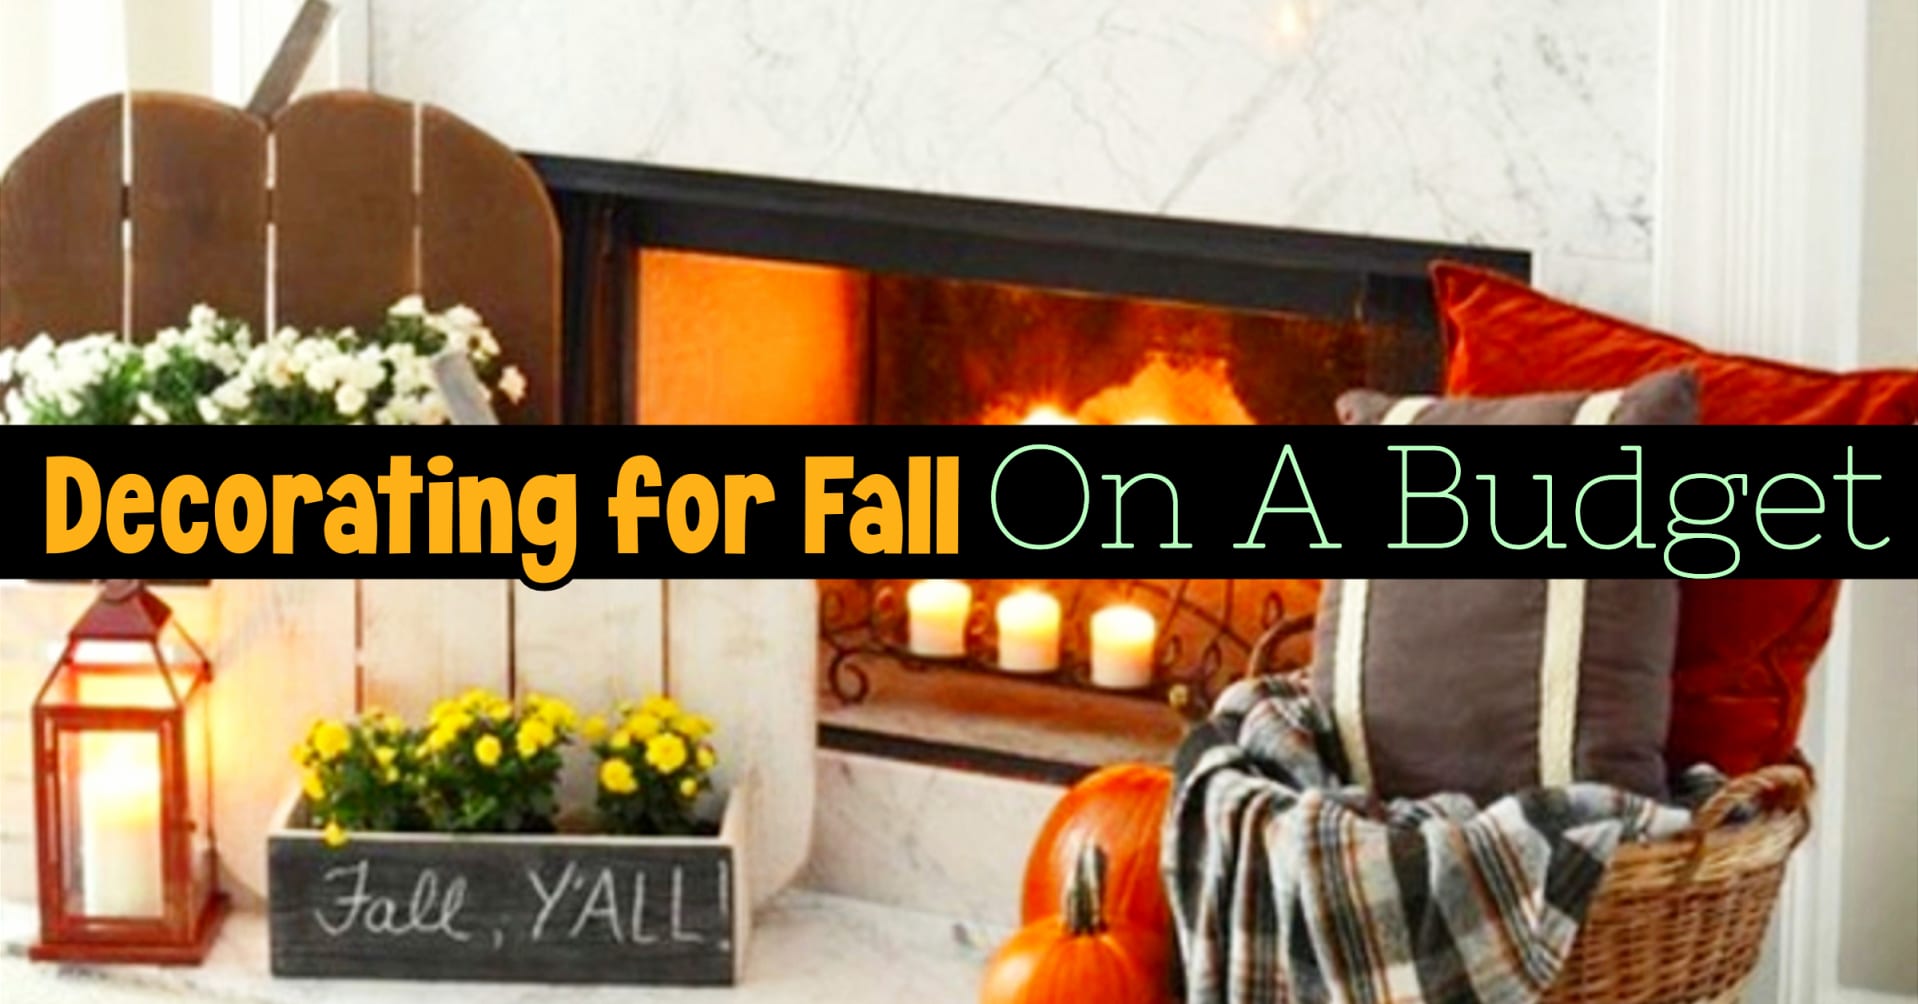 Decorating For Fall on a Budget - Unique DIY Fall Decor Ideas For The Home